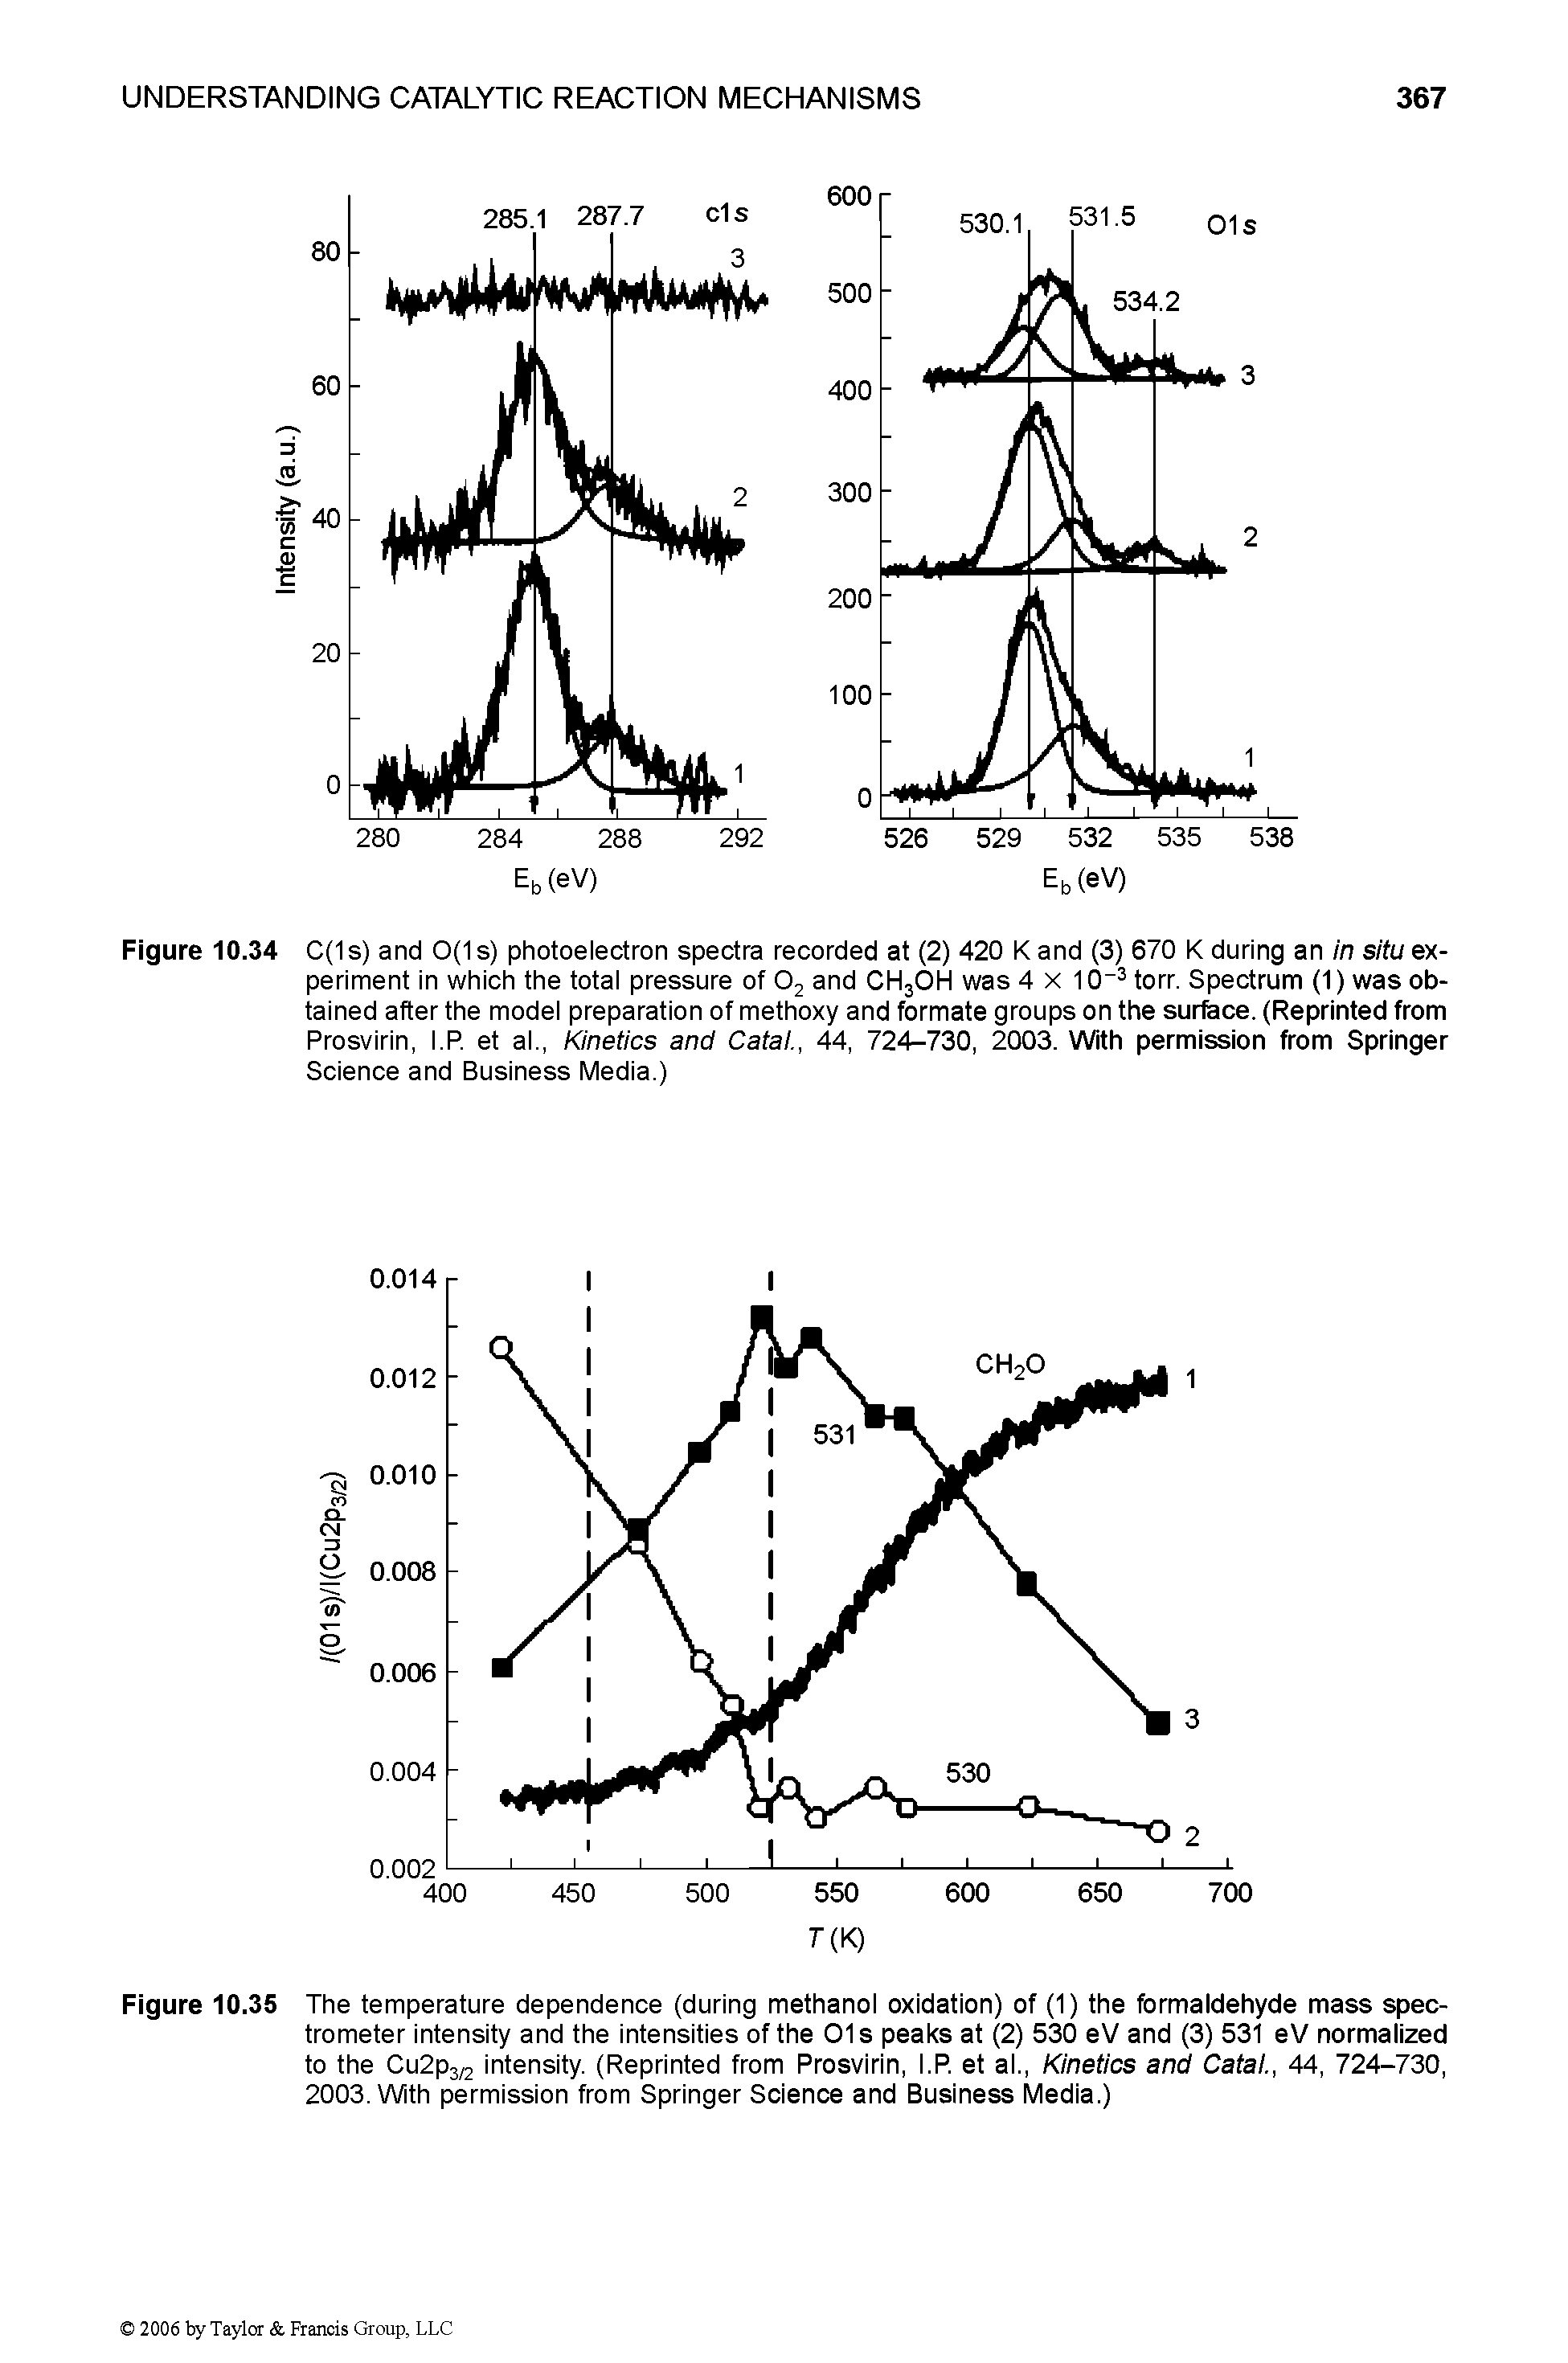 Figure 10.34 C(1s) and 0(1 s) photoelectron spectra recorded at (2) 420 K and (3) 670 K during an in situ experiment in which the total pressure of 02 and CH3OH was 4 x 10-3 torr. Spectrum (1) was obtained after the model preparation of methoxy and formate groups on the surface. (Reprinted from Prosvirin, I.P et al., Kinetics and Catal., 44, 724-730, 2003. With permission from Springer Science and Business Media.)...